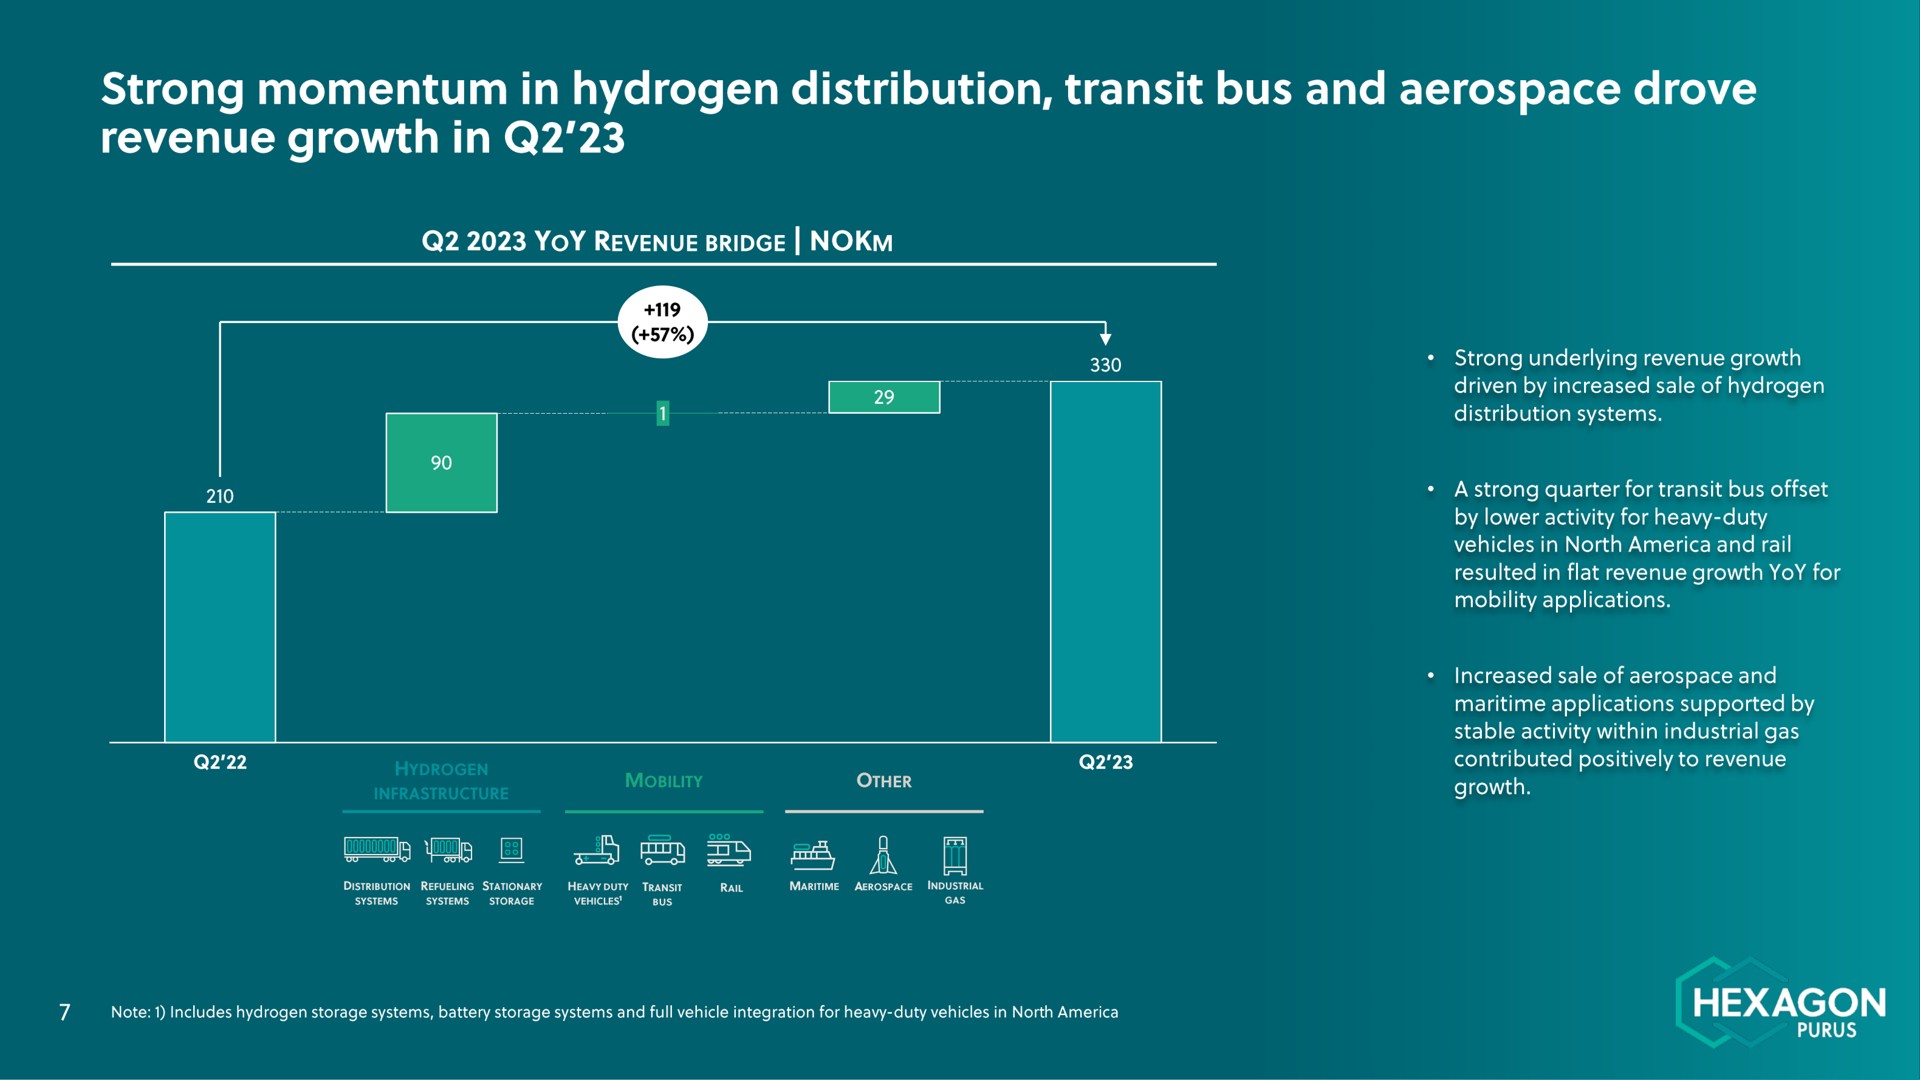 strong momentum in hydrogen distribution transit bus and drove | Hexagon Purus